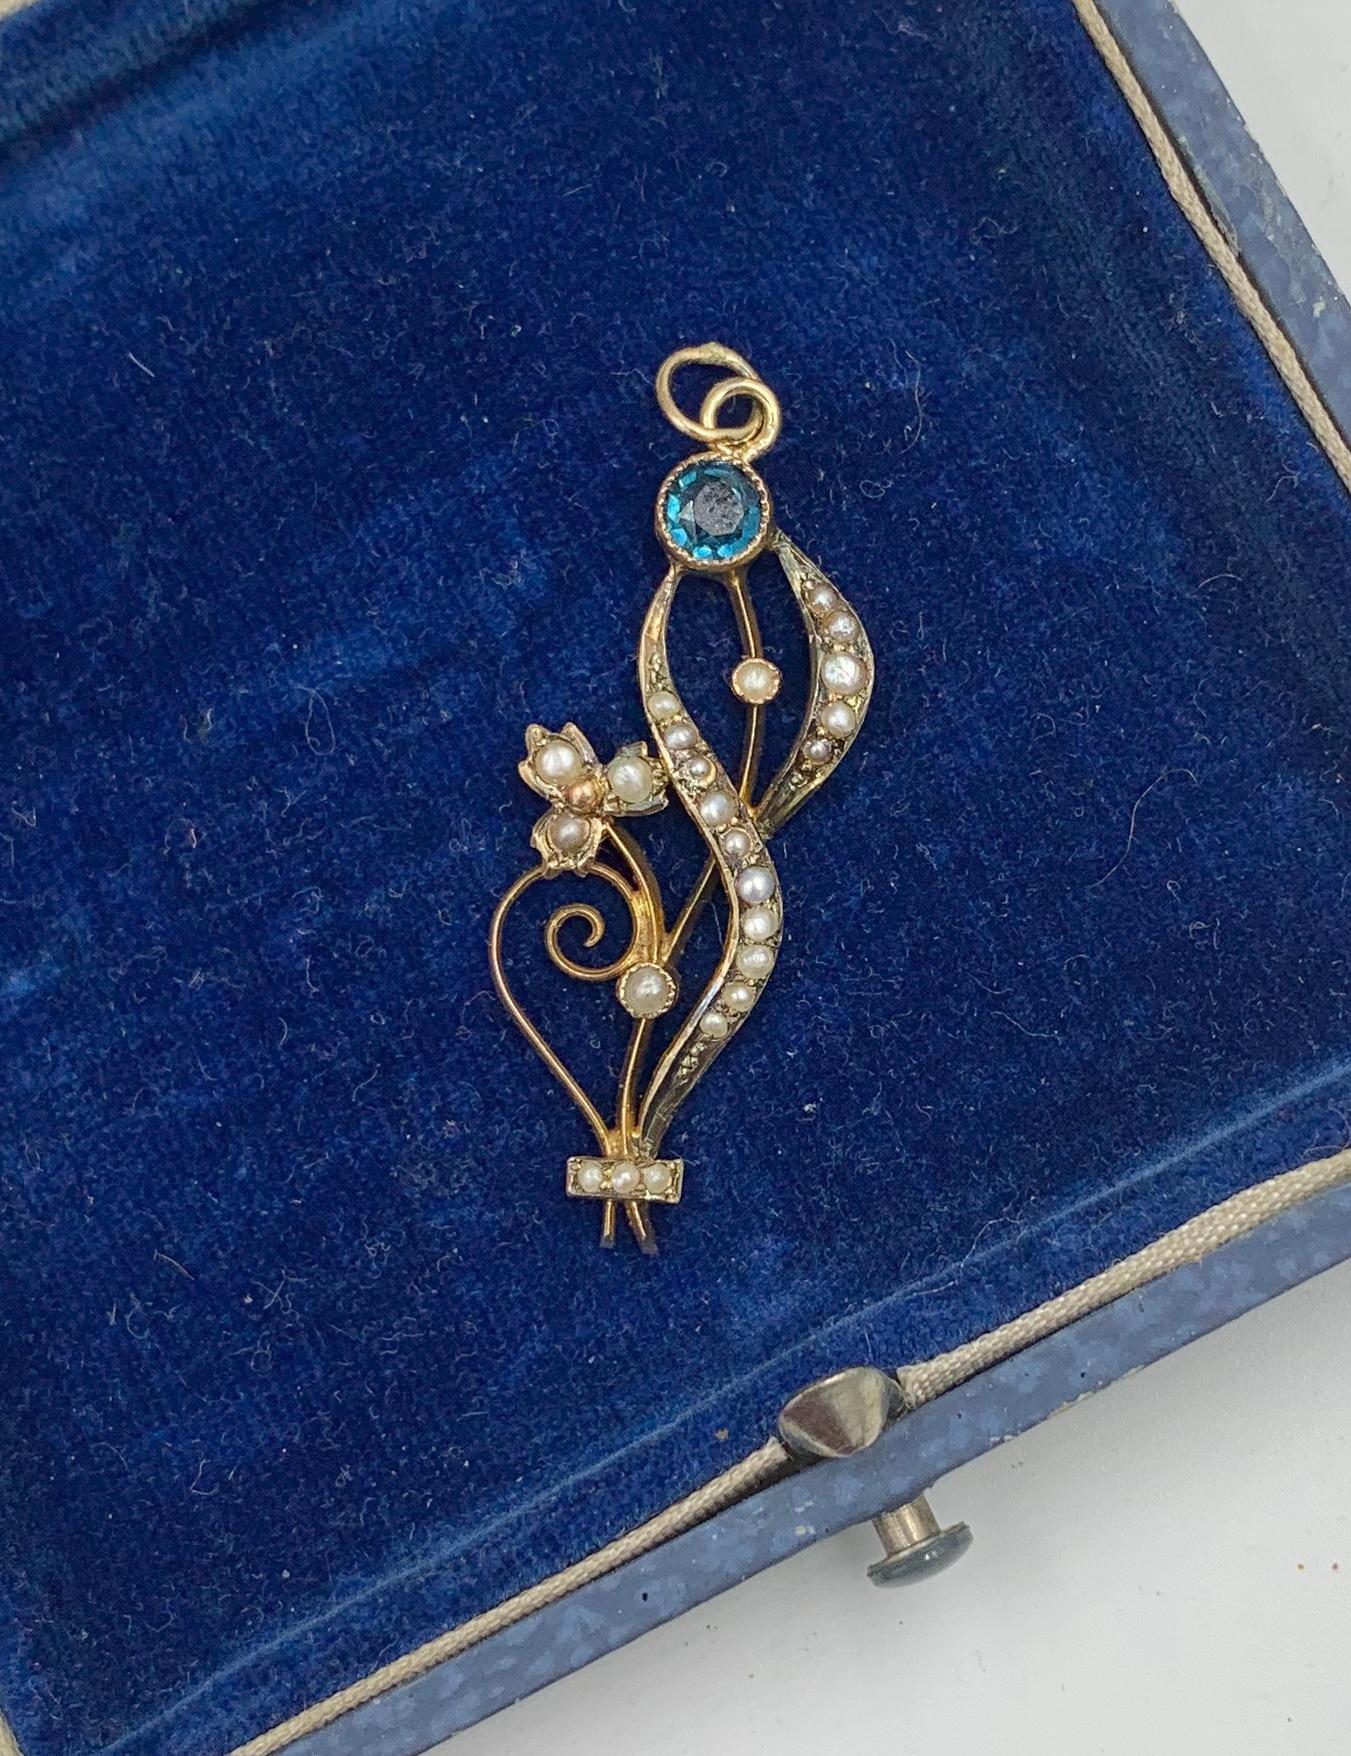 A VICTORIAN - ART NOUVEAU SAPPHIRE PEARL PENDANT IN THE FORM OF A FLOWER.  THE PENDANT IS SO STUNNING WITH THE MOST WONDERFUL THREE DIMENSIONAL DEPICTION OF THE FLOWER.   THE GOLD WORK IS LOVELY AND THE FLOWER IS SET WITH A RADIANT ROUND FACETED